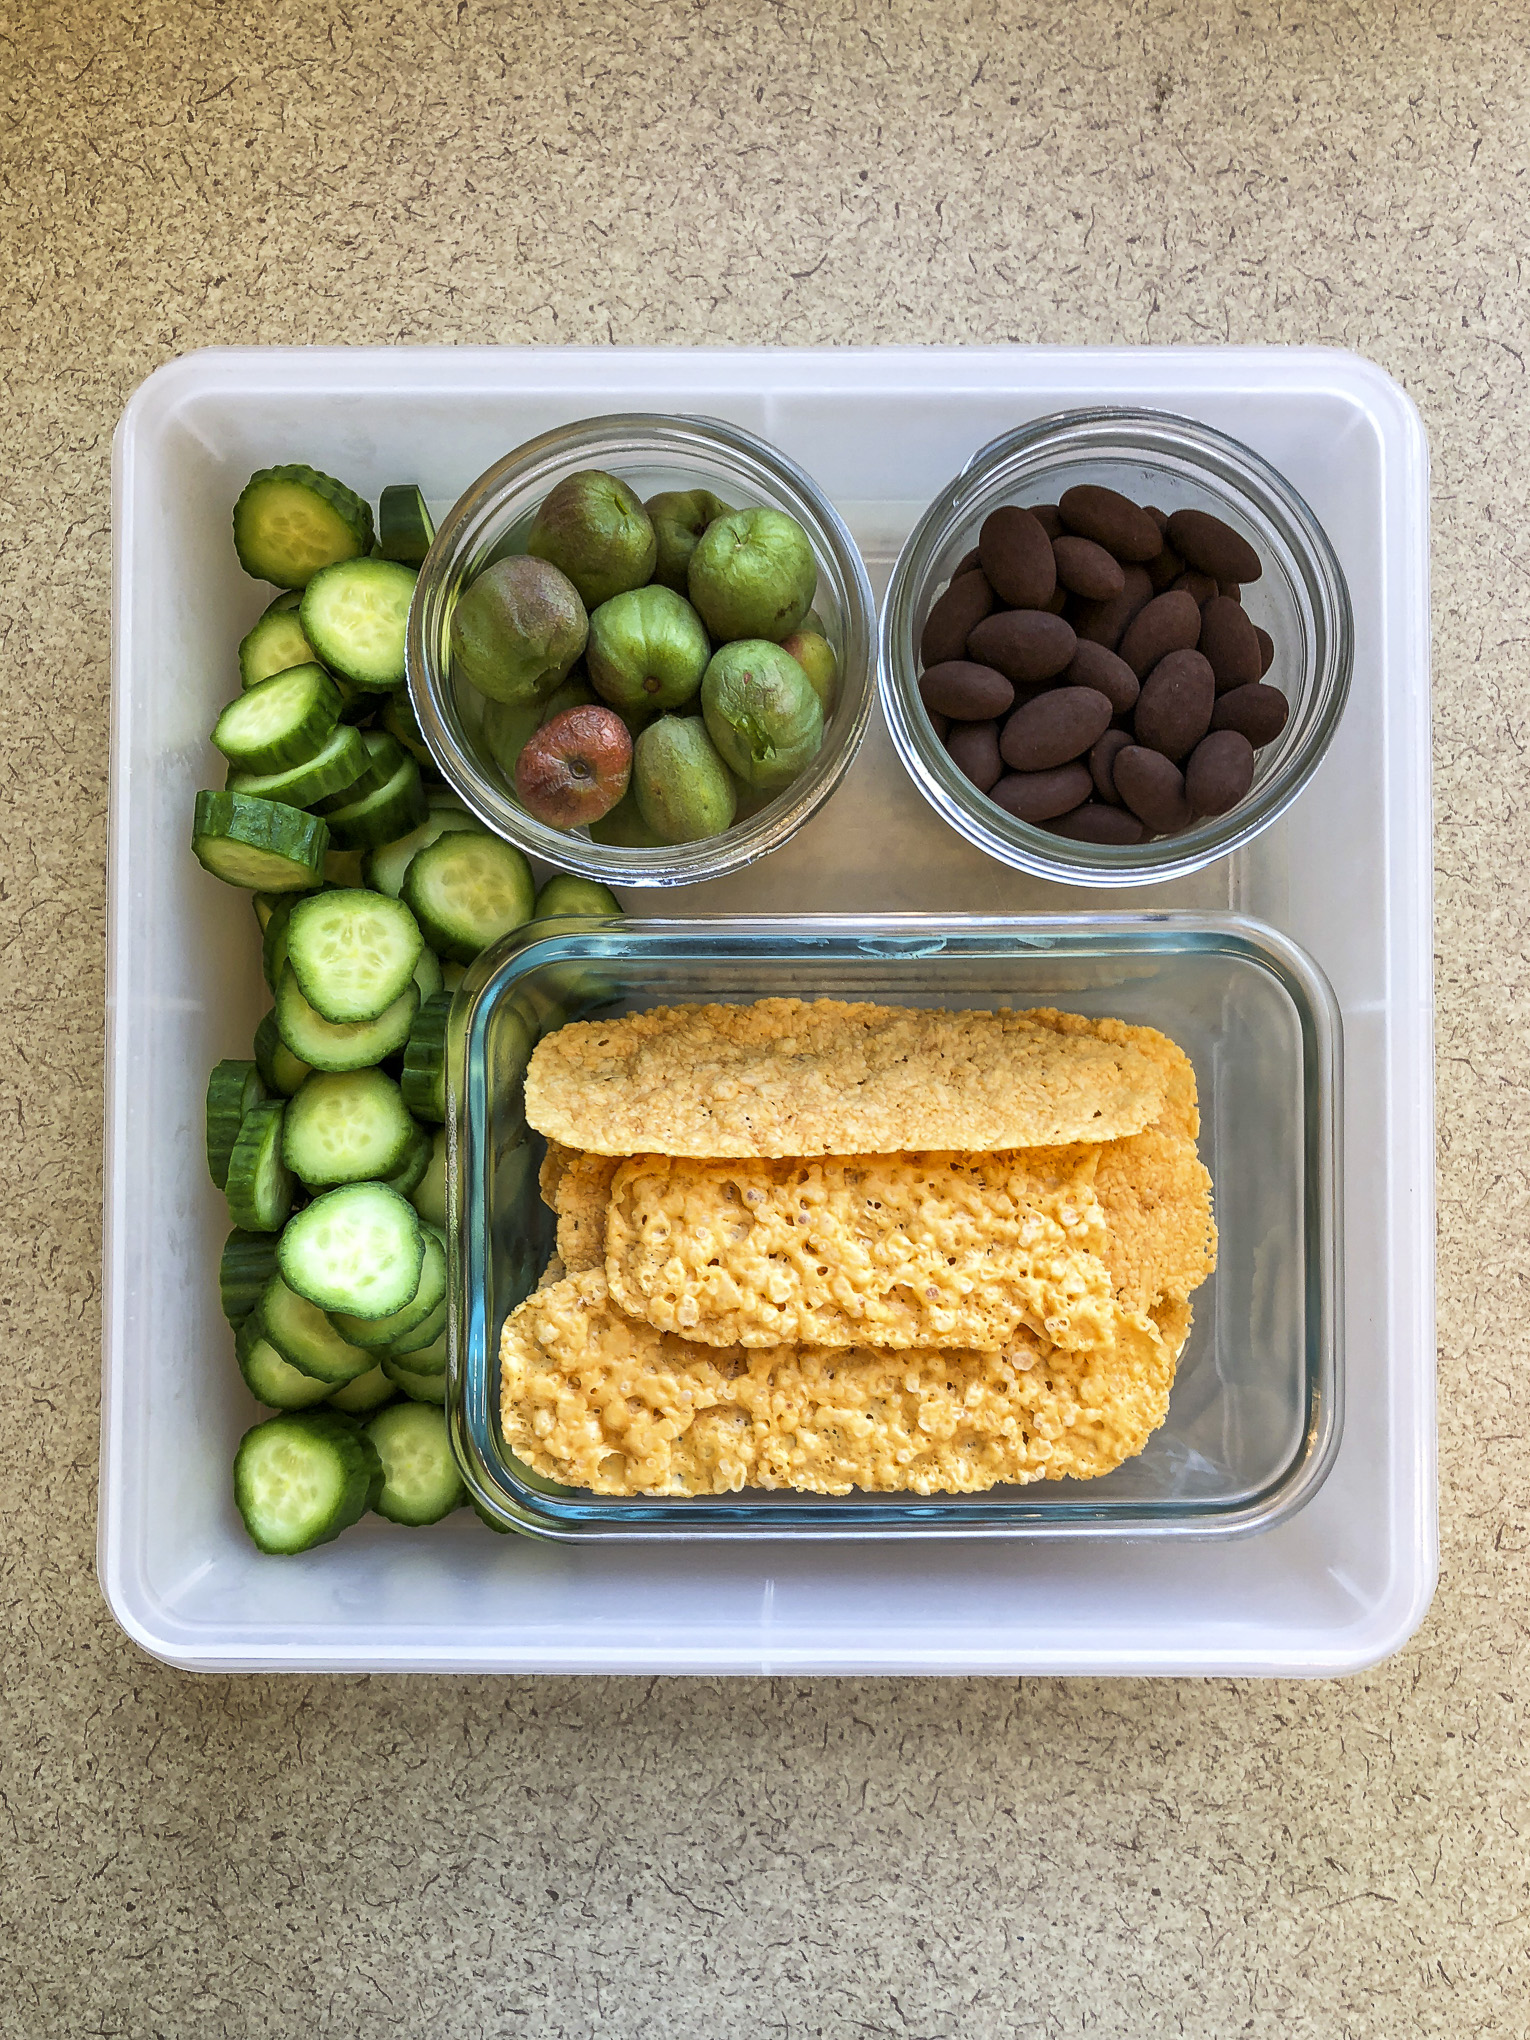 Tupperware filled with kiwi berries, chocolate almonds, parmesan crisps and cucumbers